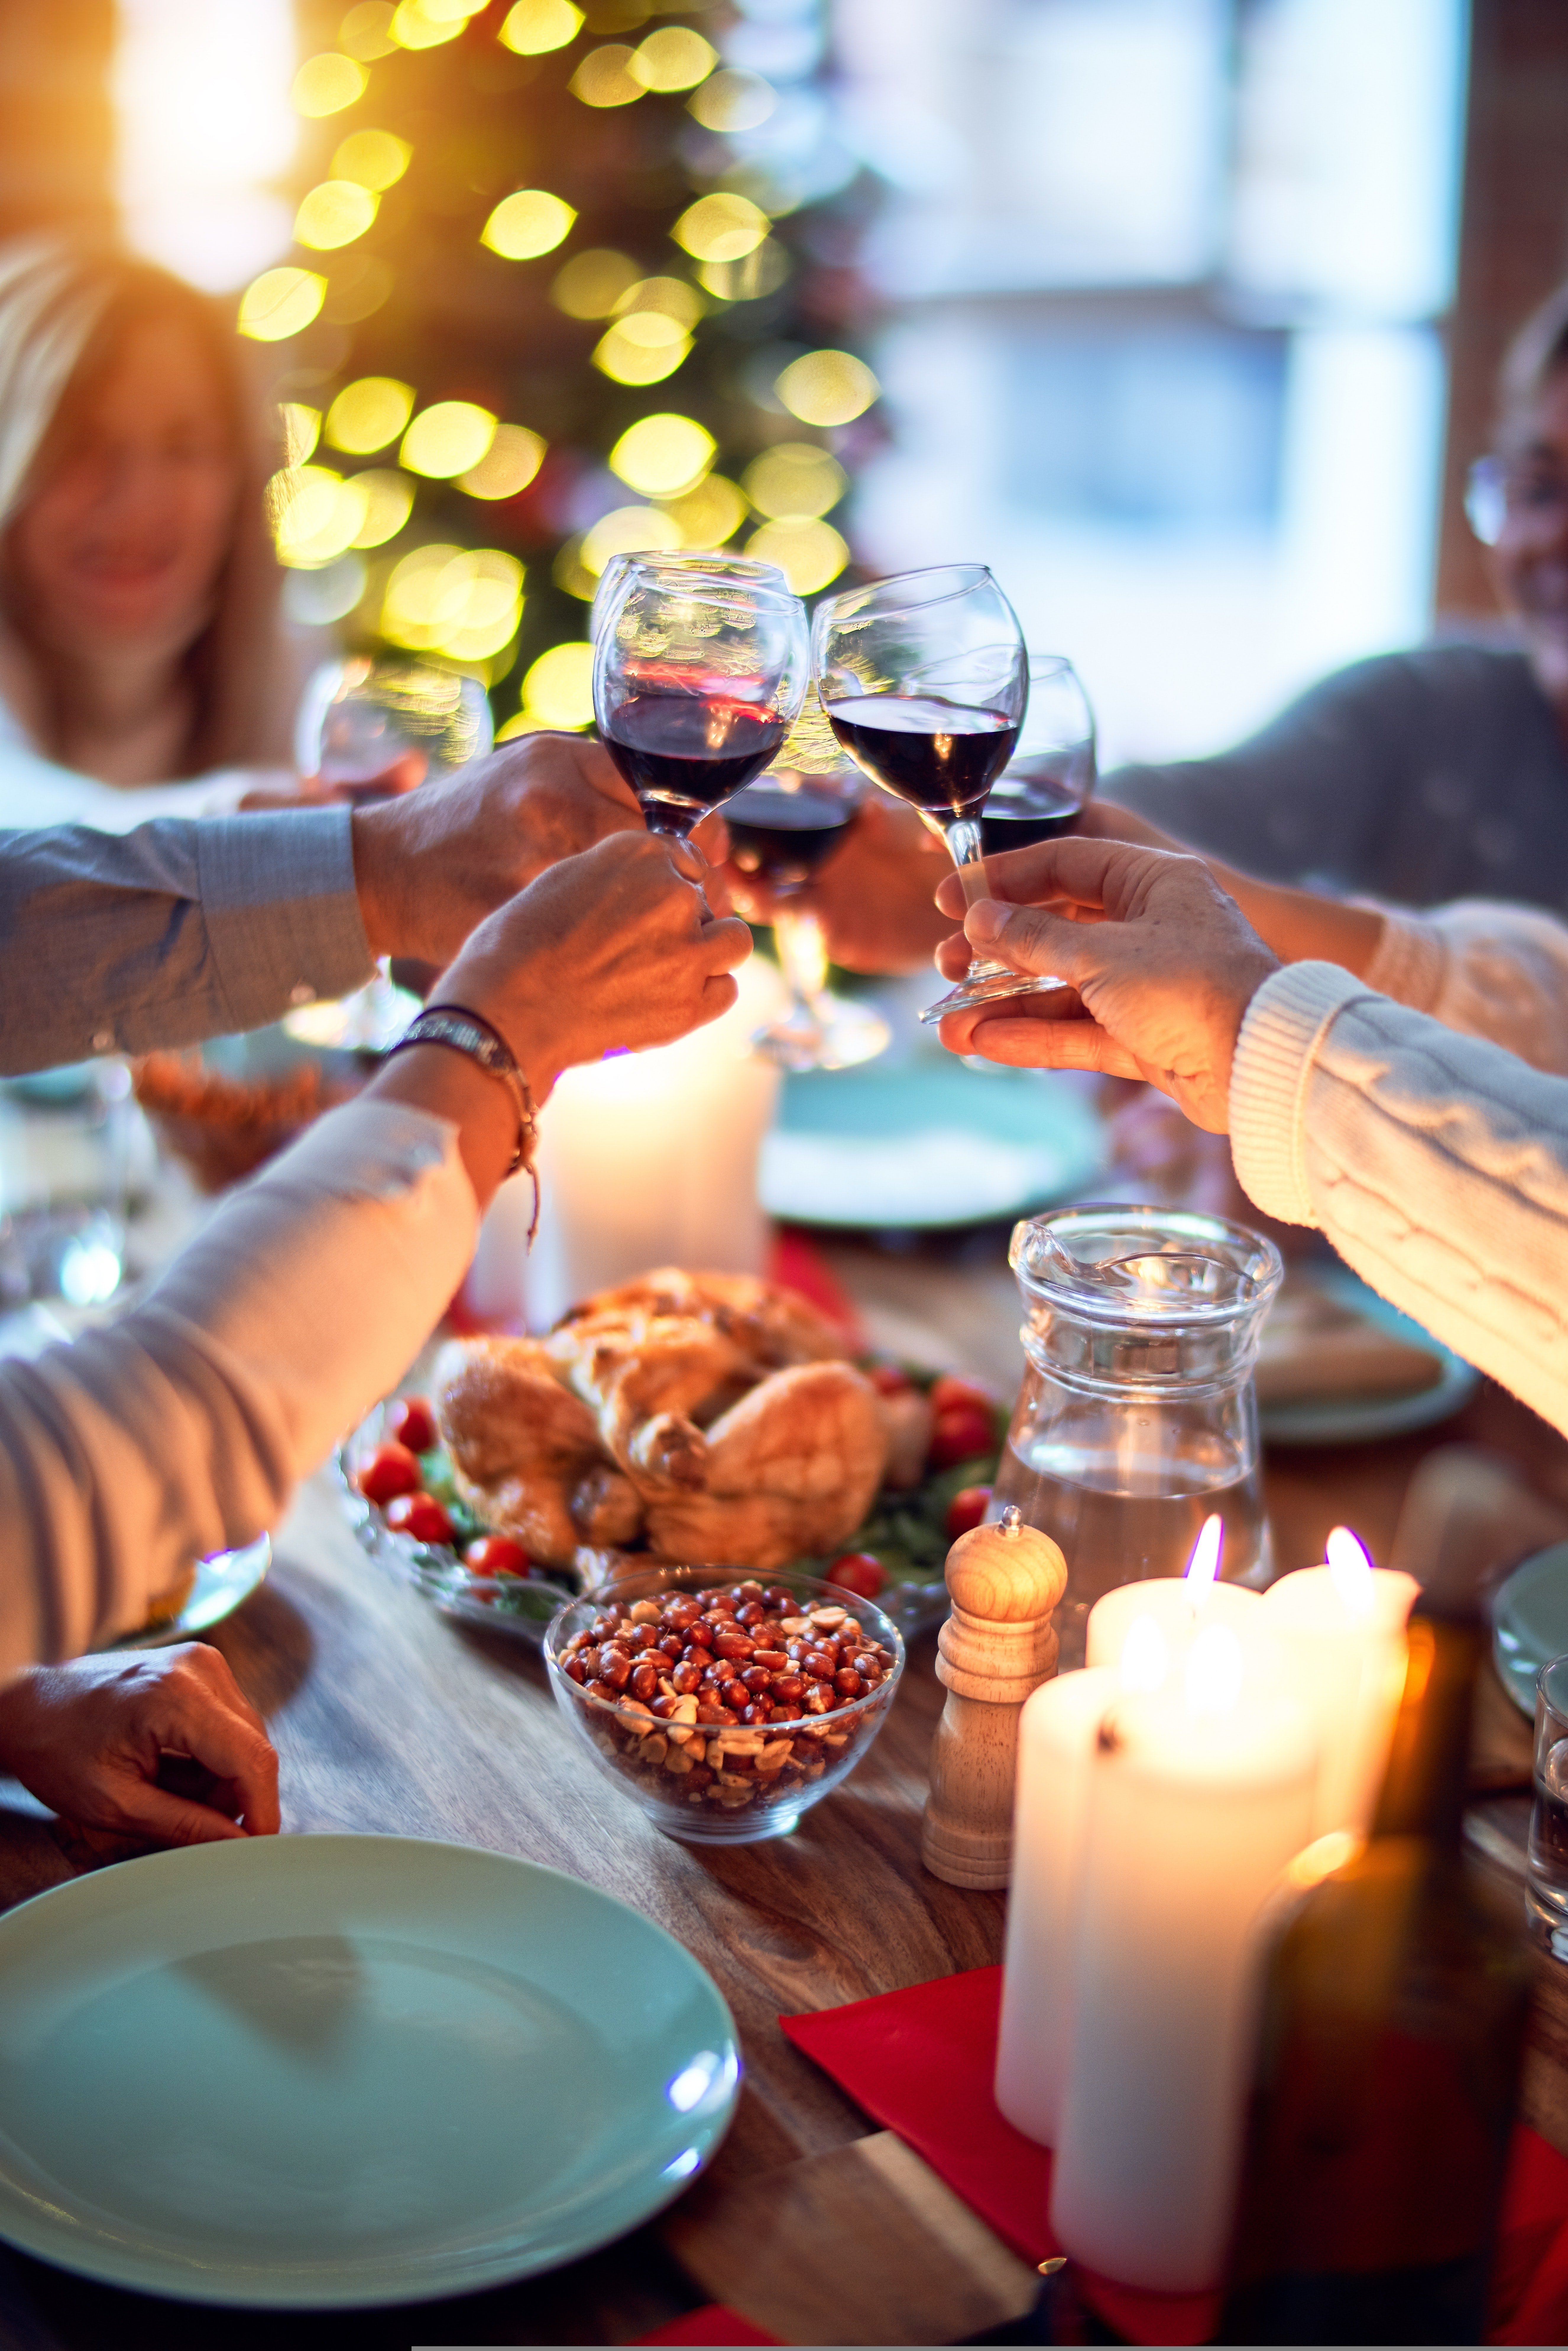 David broke the news to his parents over Thanksgiving dinner. | Source: Unsplash